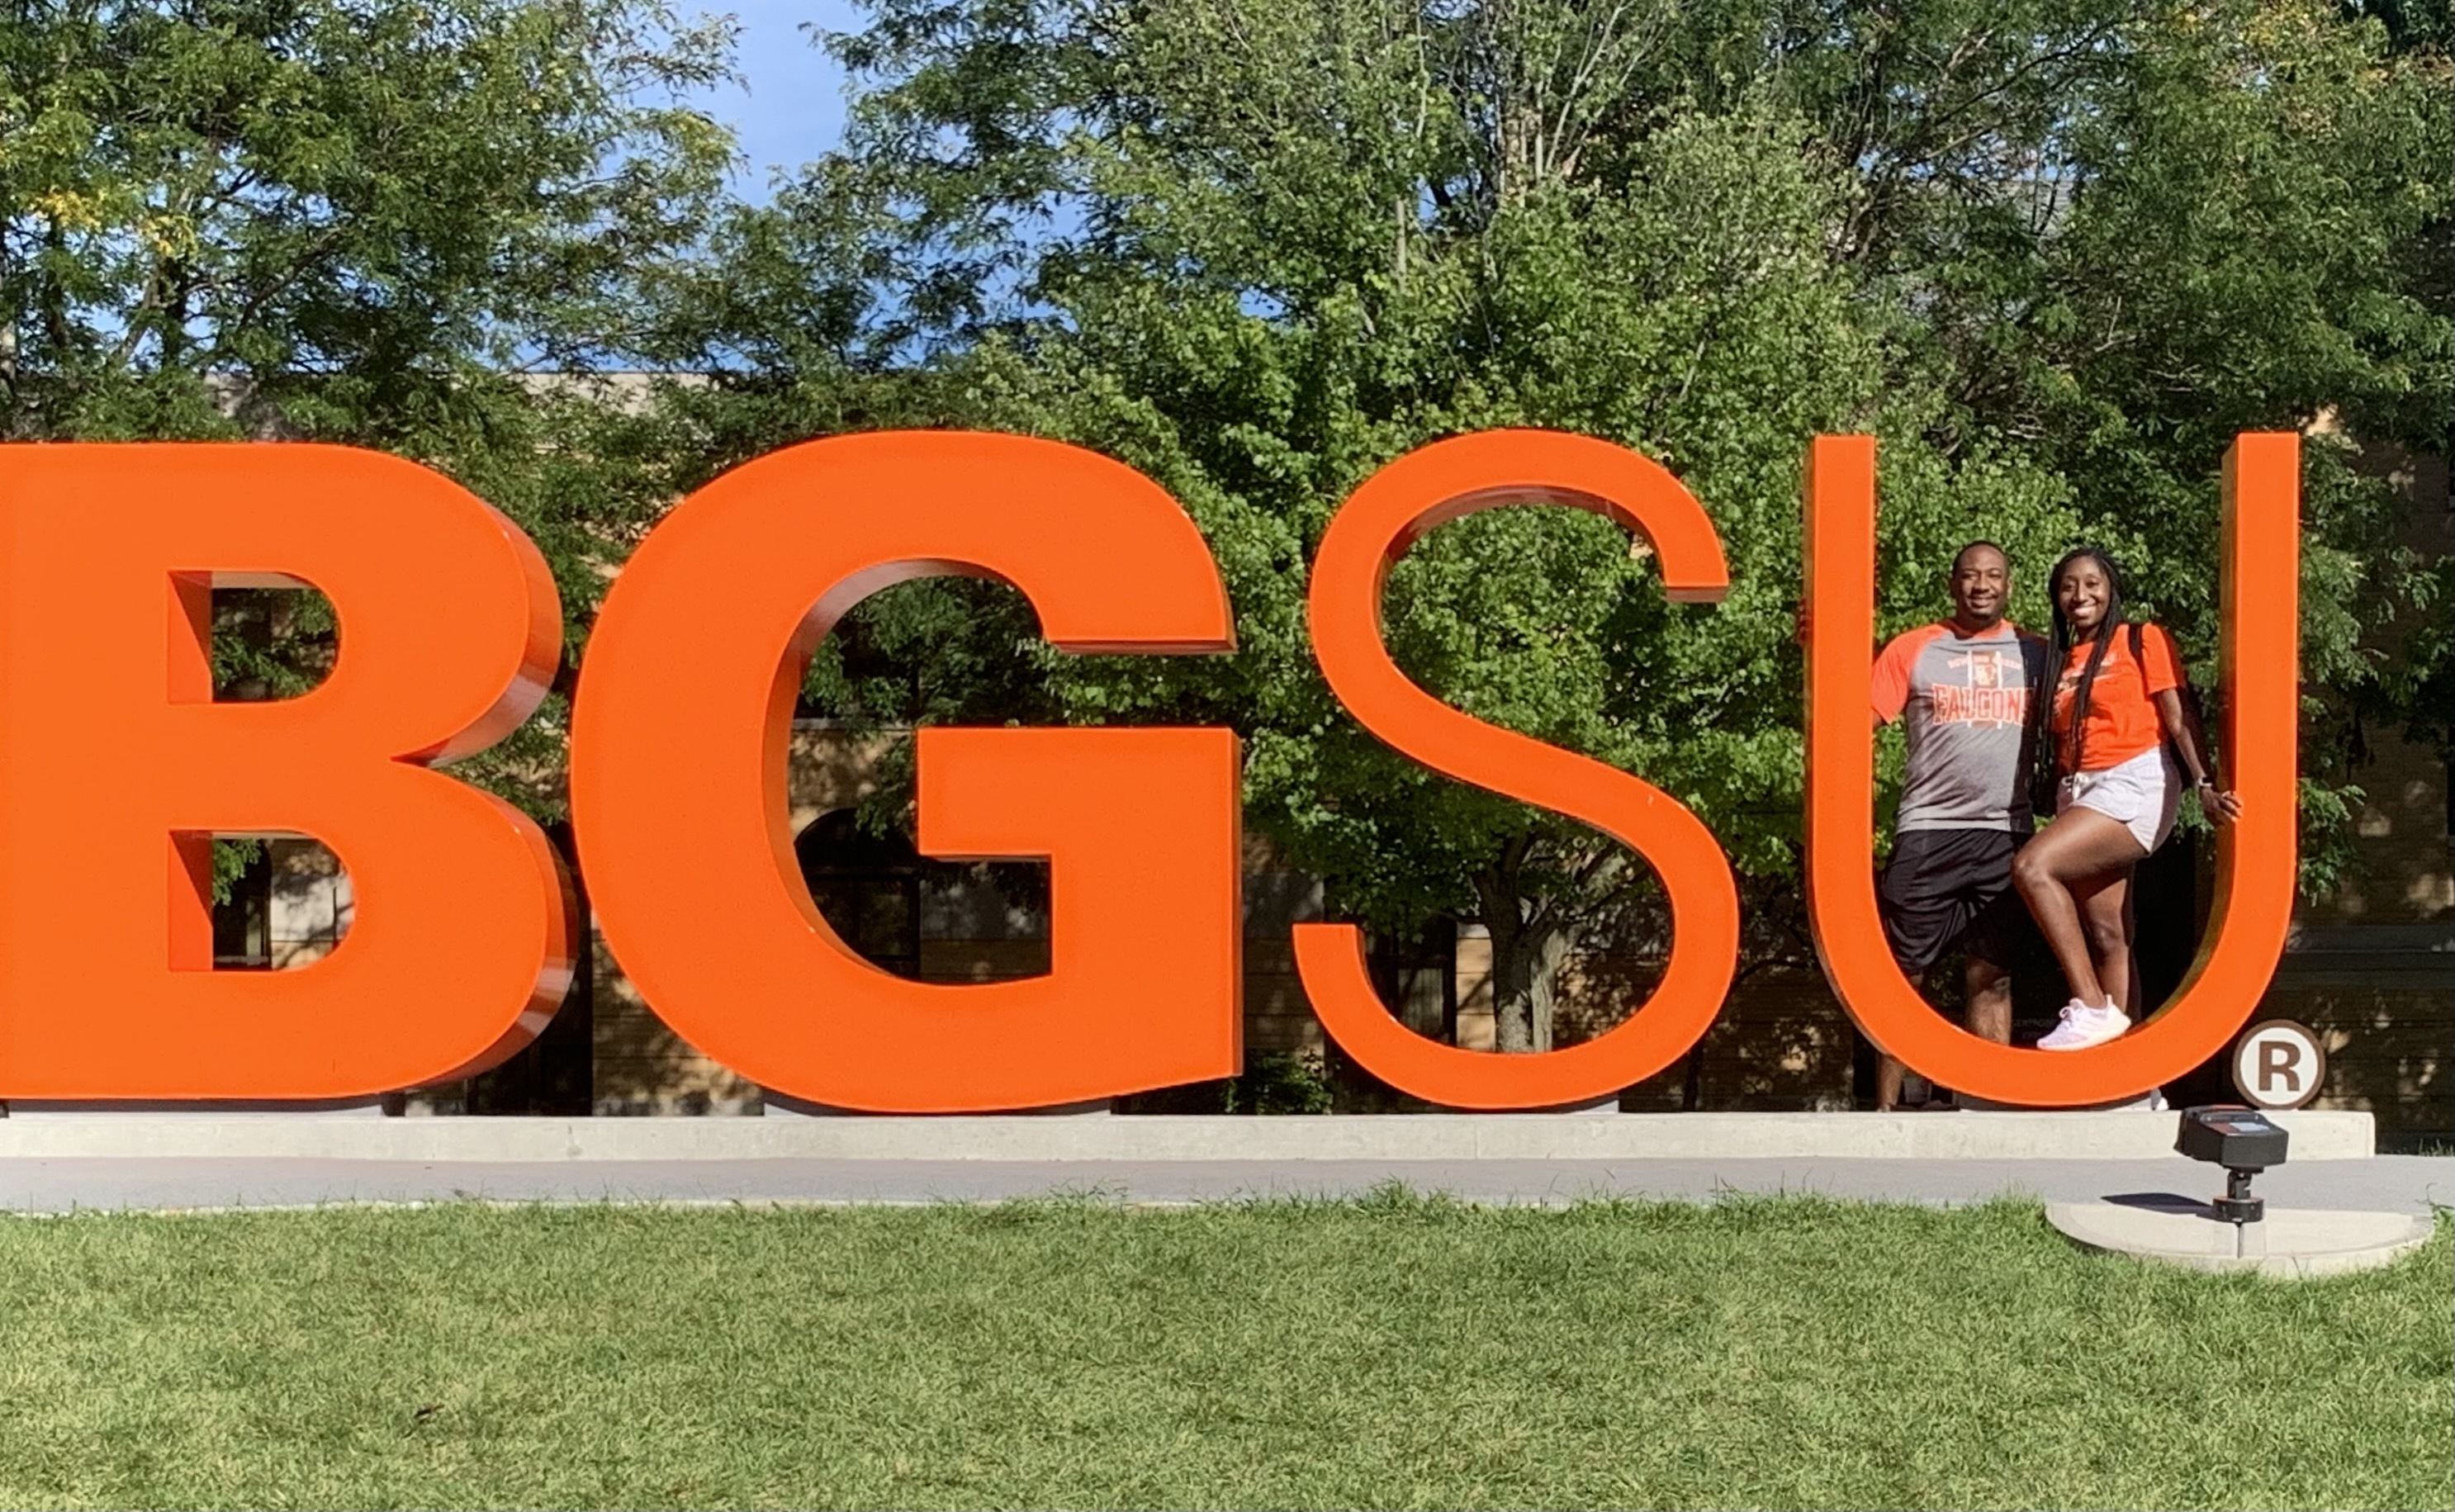 Carl '05 and Victoria '05 Sandifer attend Homecoming on the Bowling Green campus in 2019.